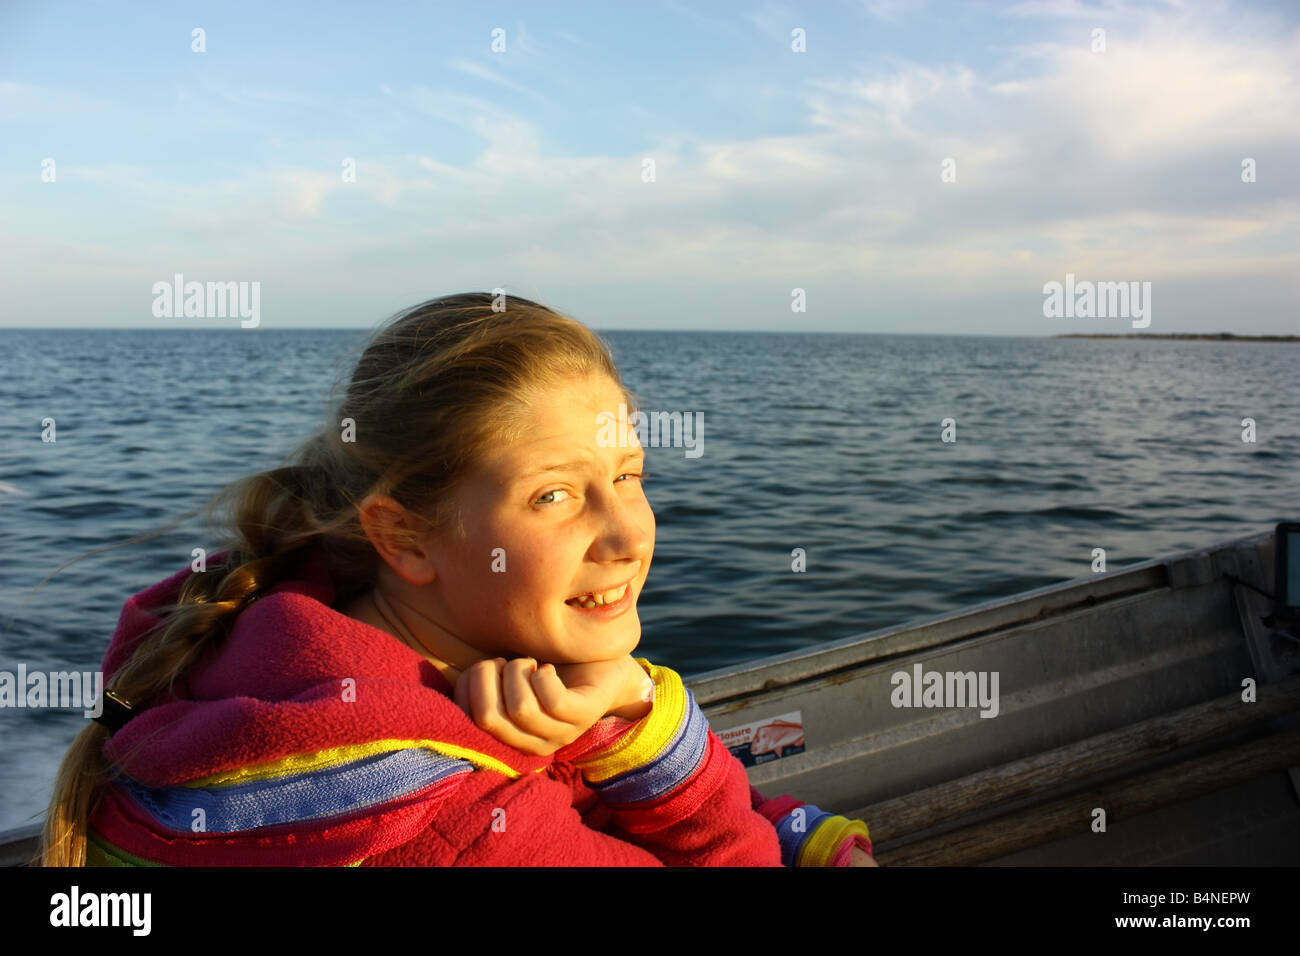 a child on a boat at sea Stock Photo